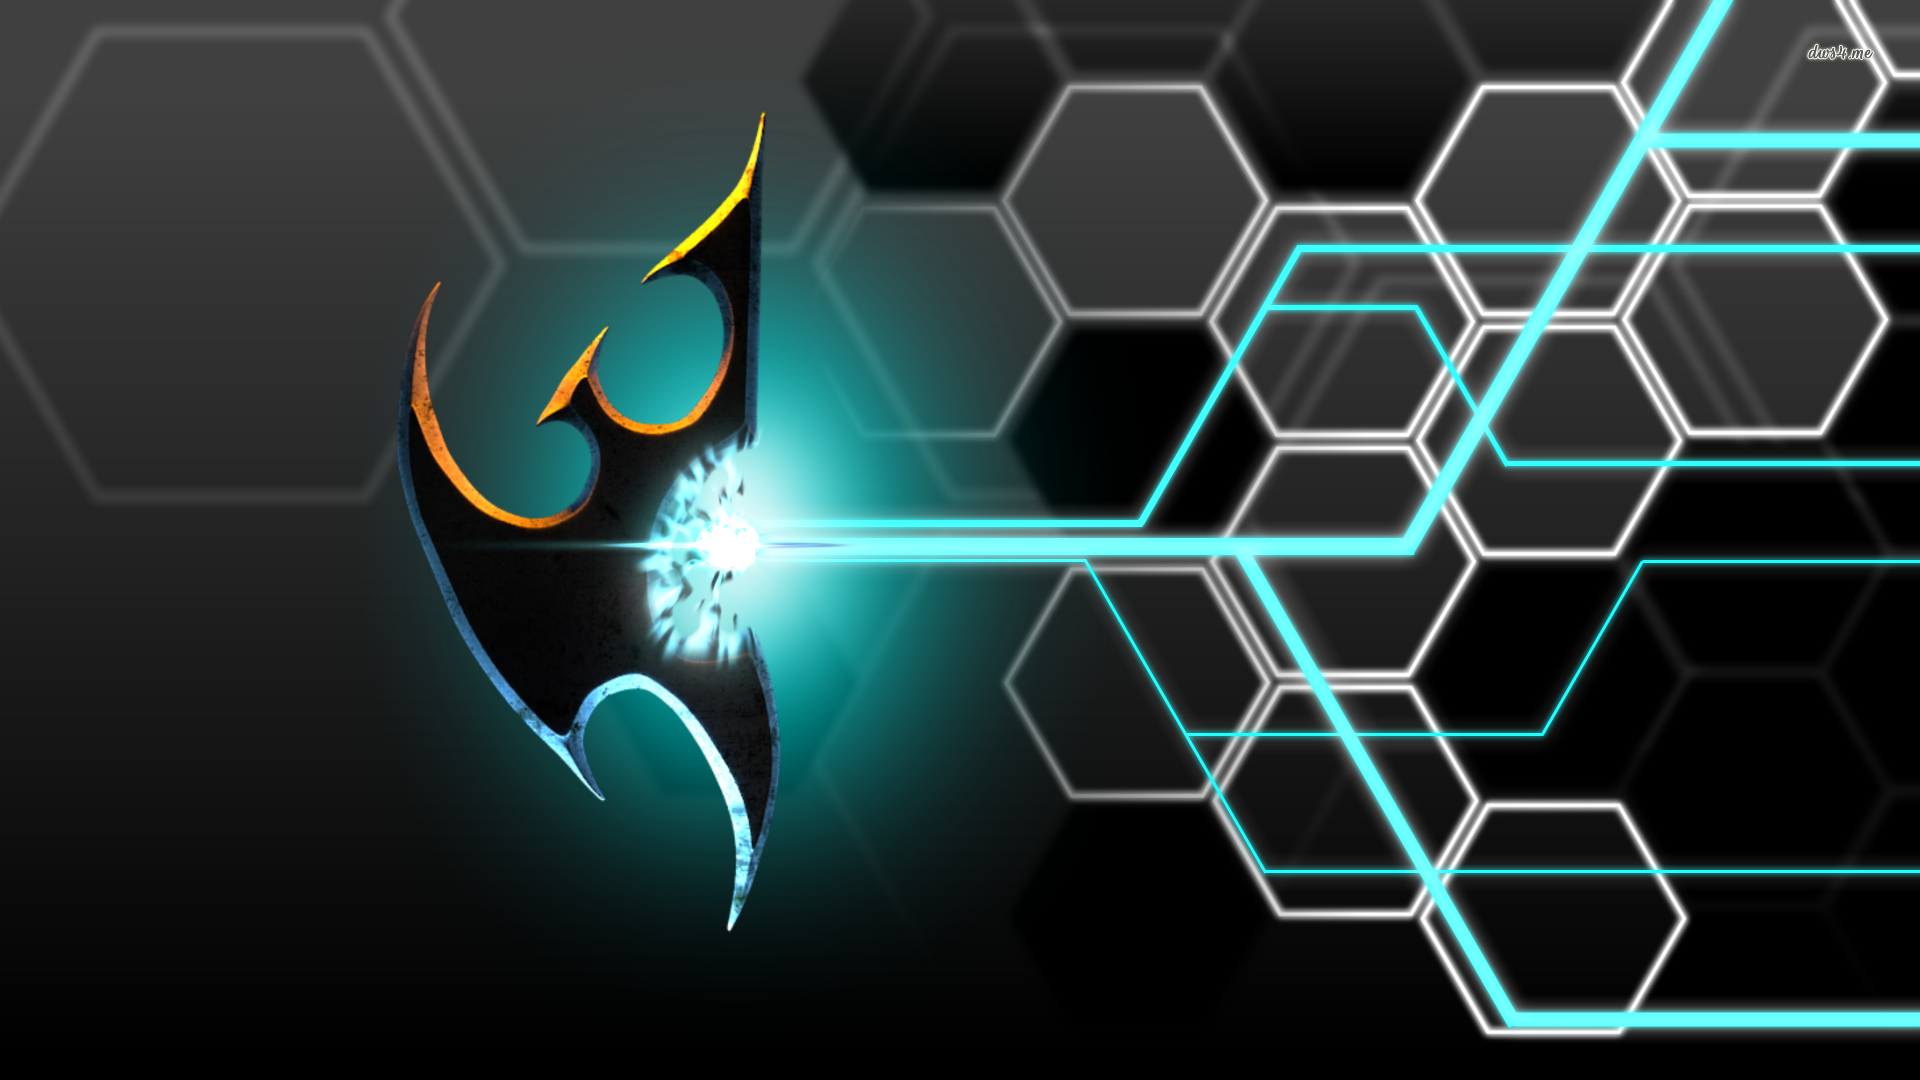 Starcraft Protoss Wallpaper Posted By Michelle Thompson